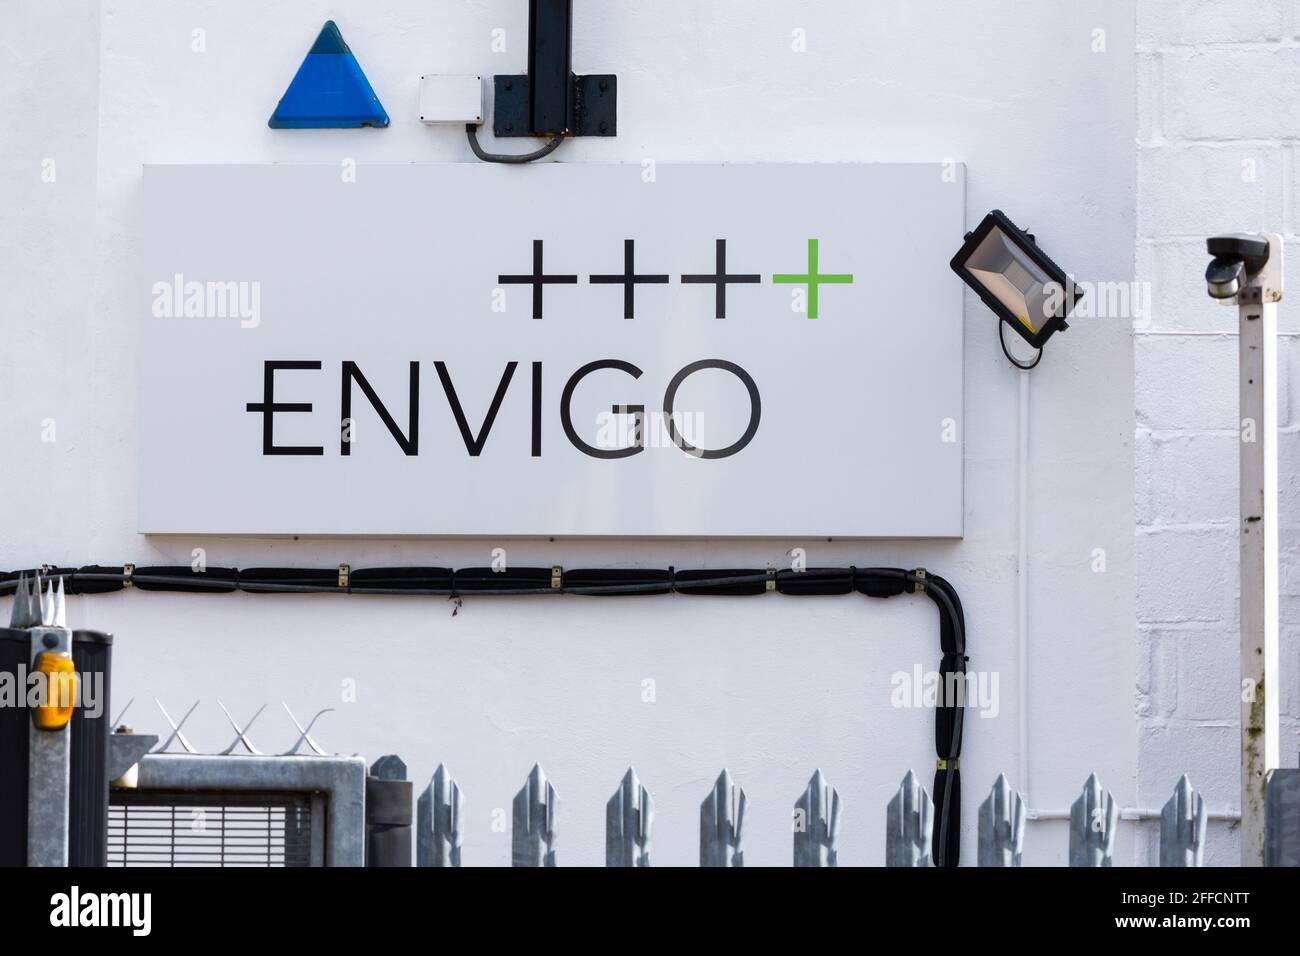 April 11th 2021. Envigo, Shaws Farm, Blackthorn, Bicester, pictured here,  is one of three Envigo UK locations. Others are based at the remote  Hillcrest Research Station near Loughborough and at Huntingdon. Envigo